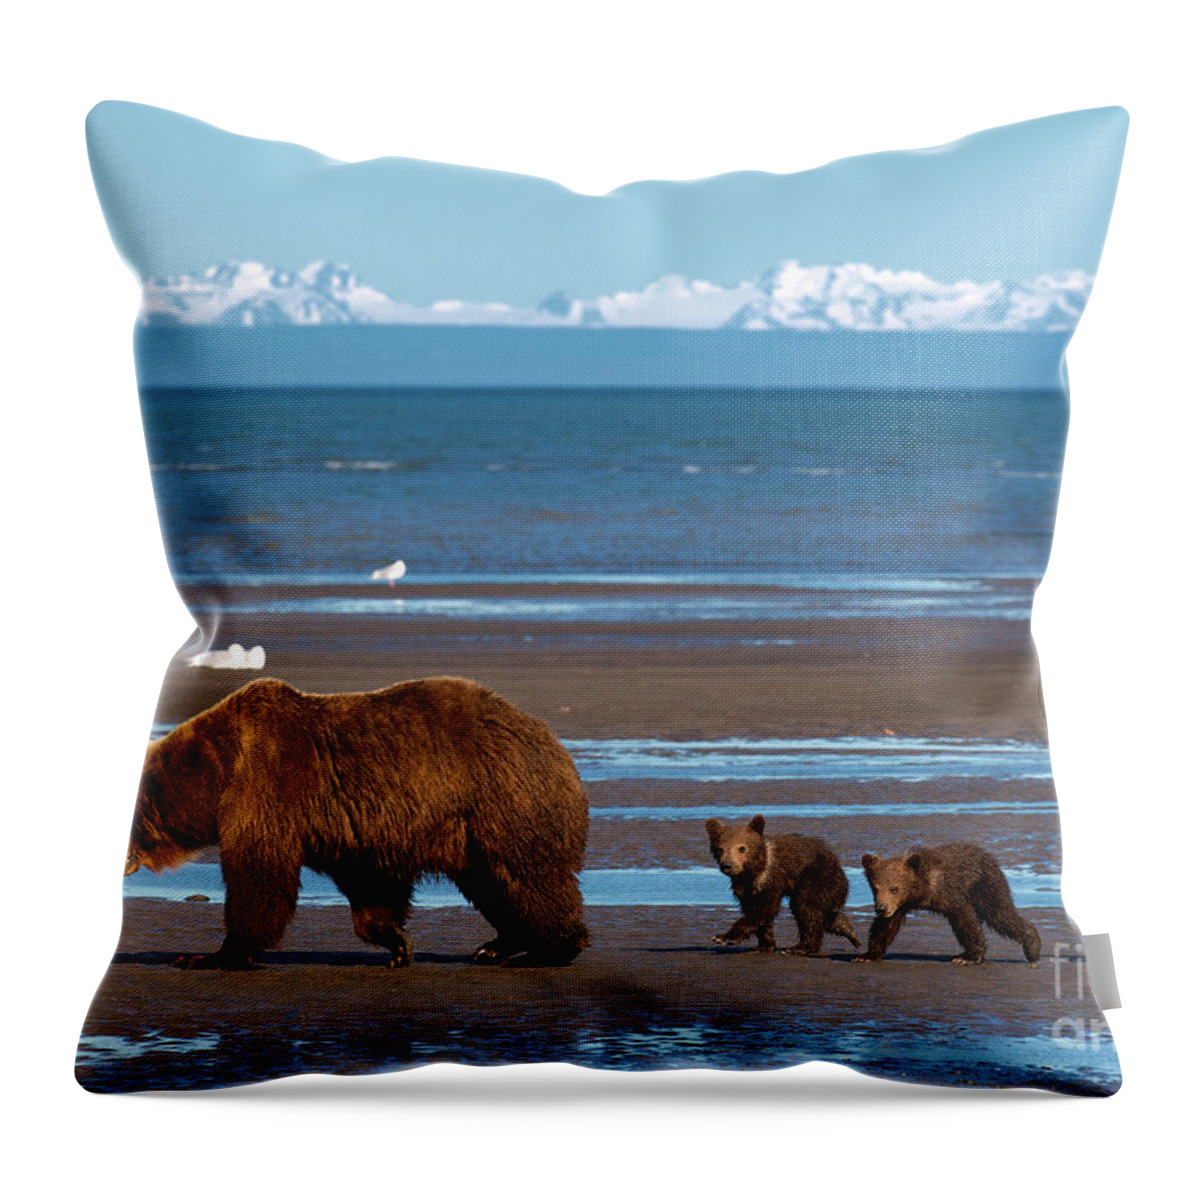 Alaskan Brown Bears Throw Pillow featuring the photograph Clamming Trip by Aaron Whittemore